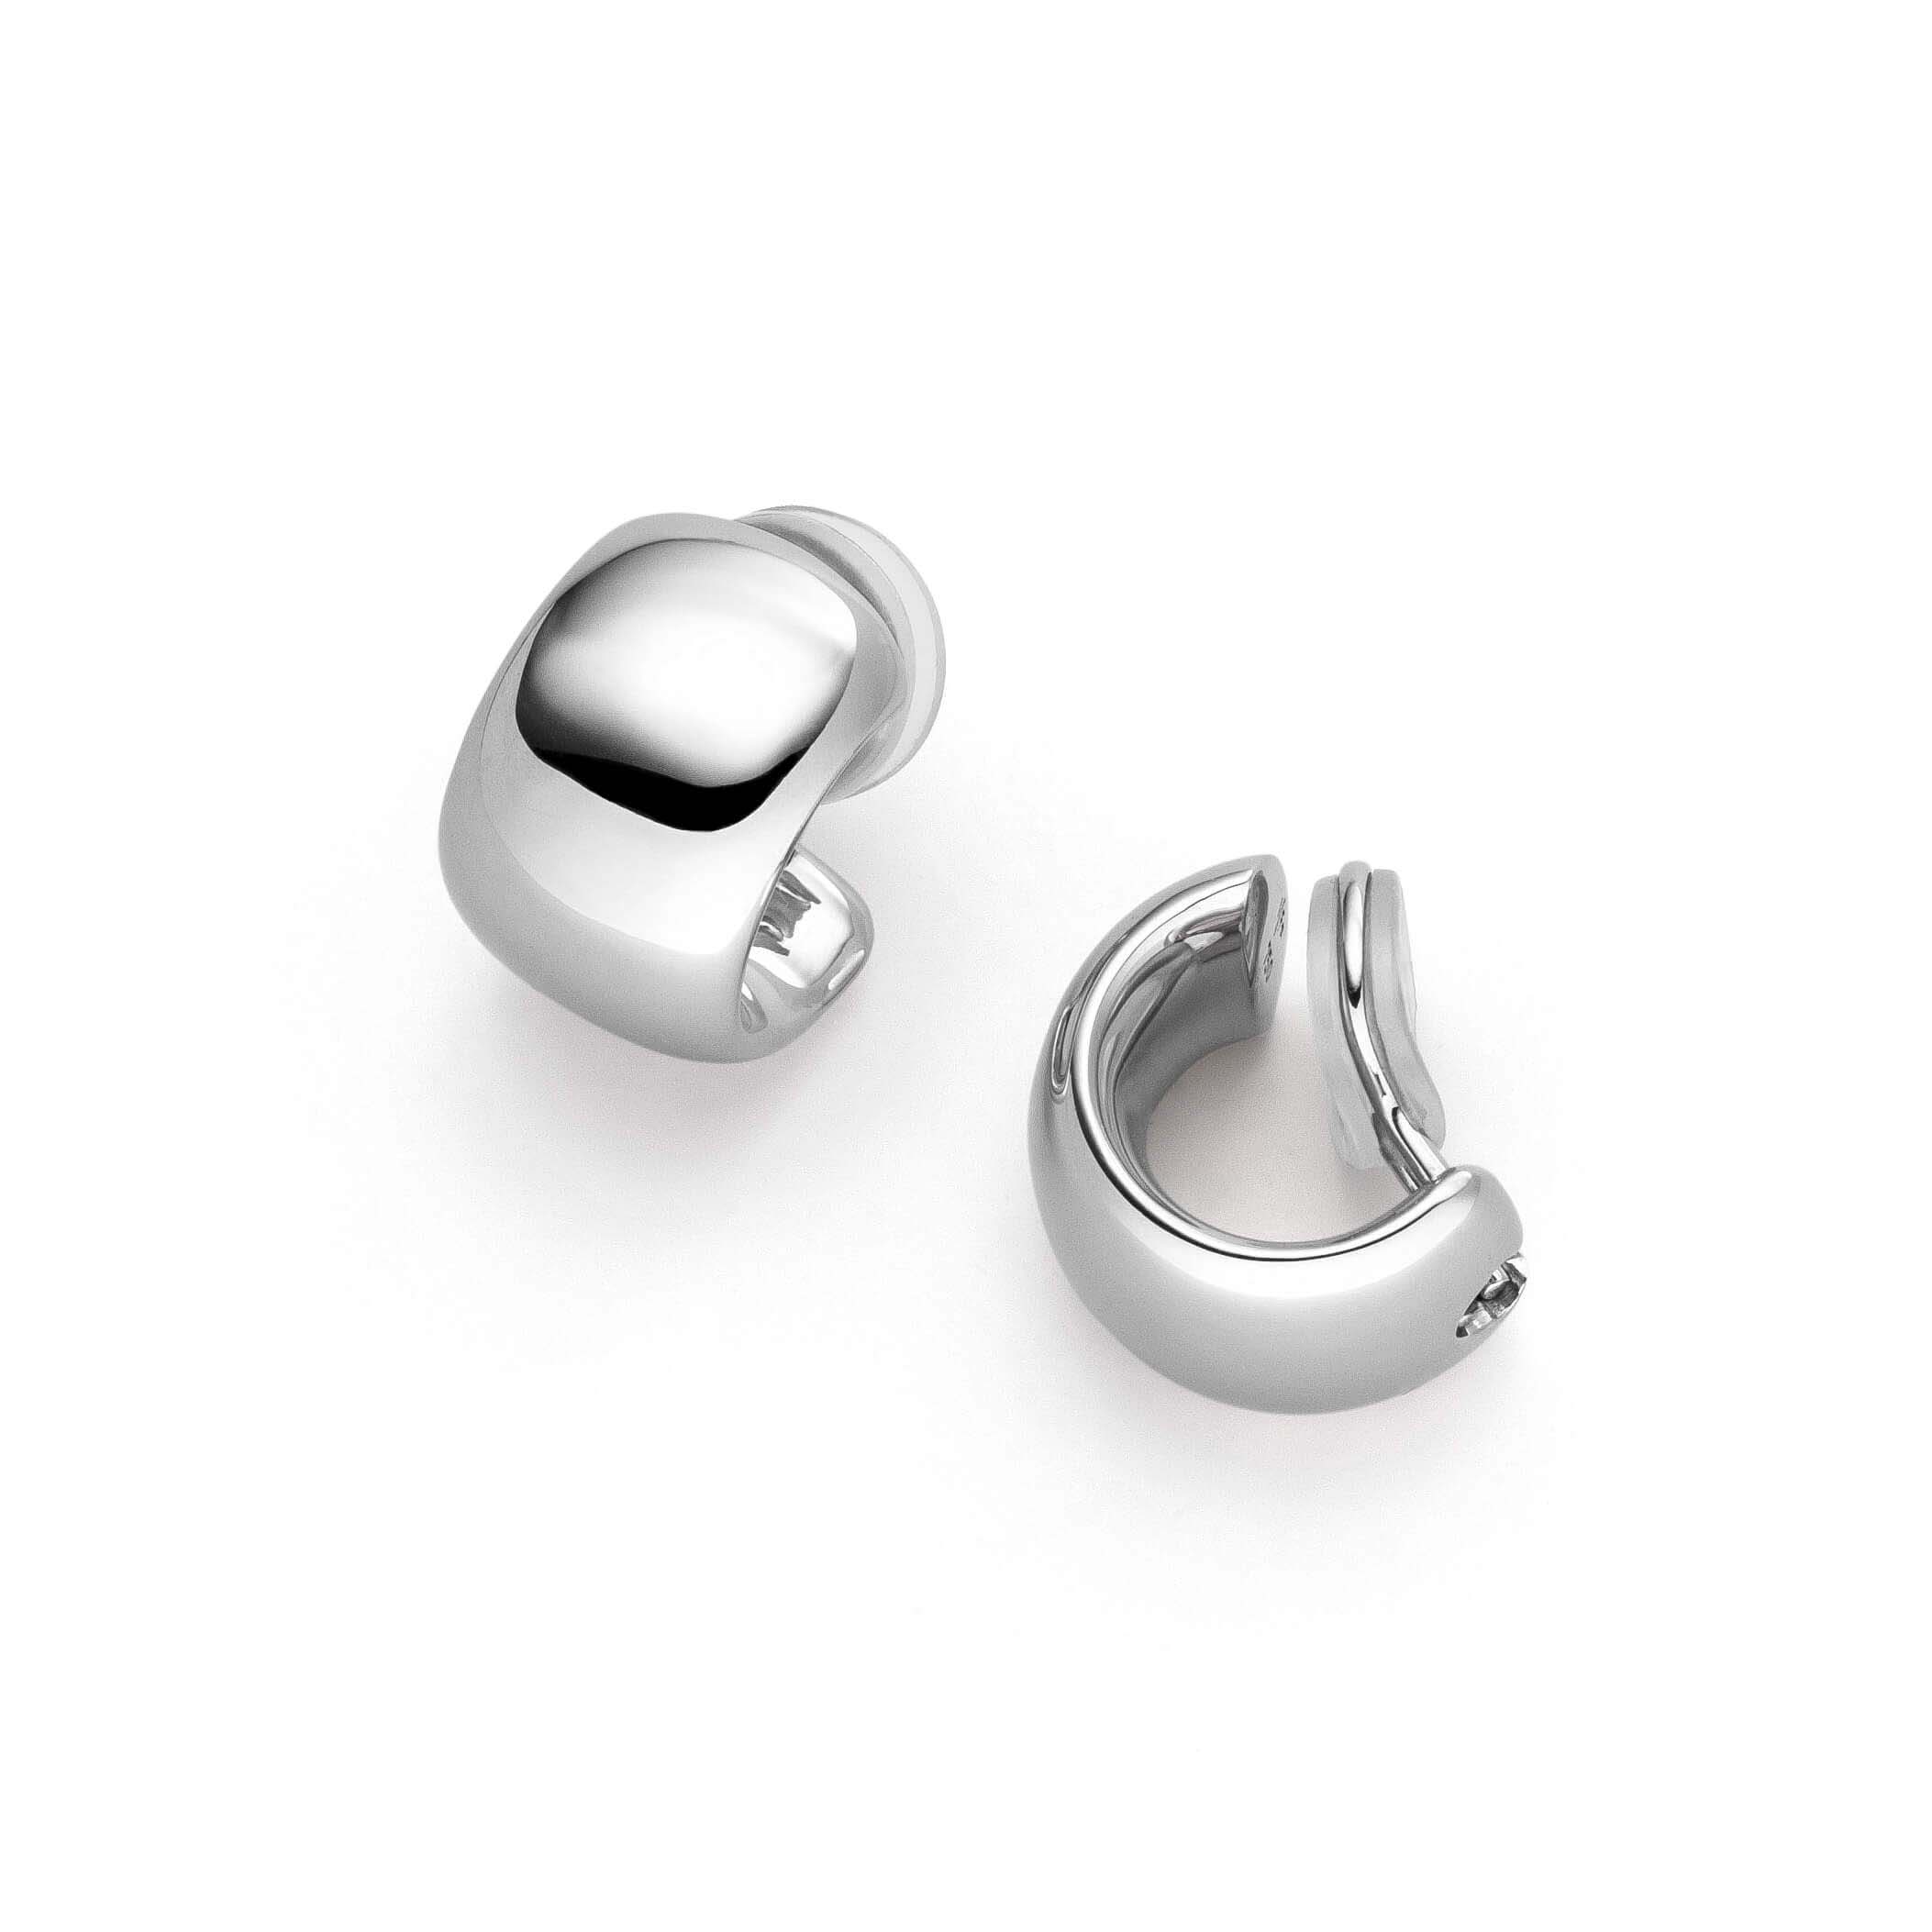 Custom 925 sterling silver earrings are exactly as described and the fit is perfect